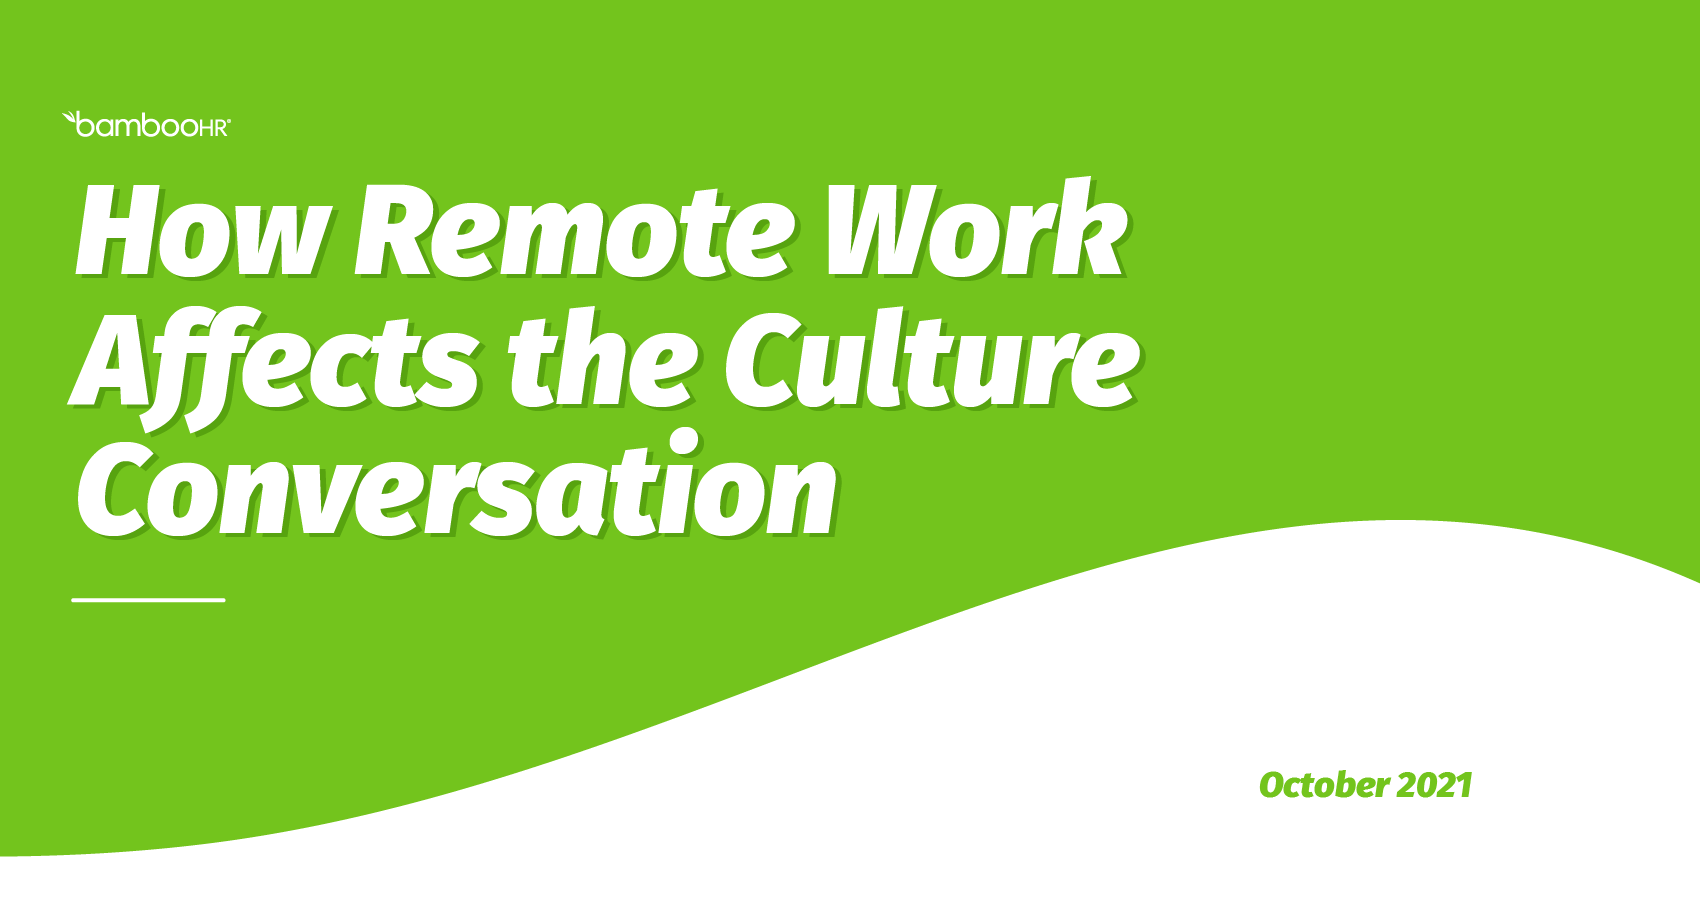 How Remote Work Affects the Culture Conversation